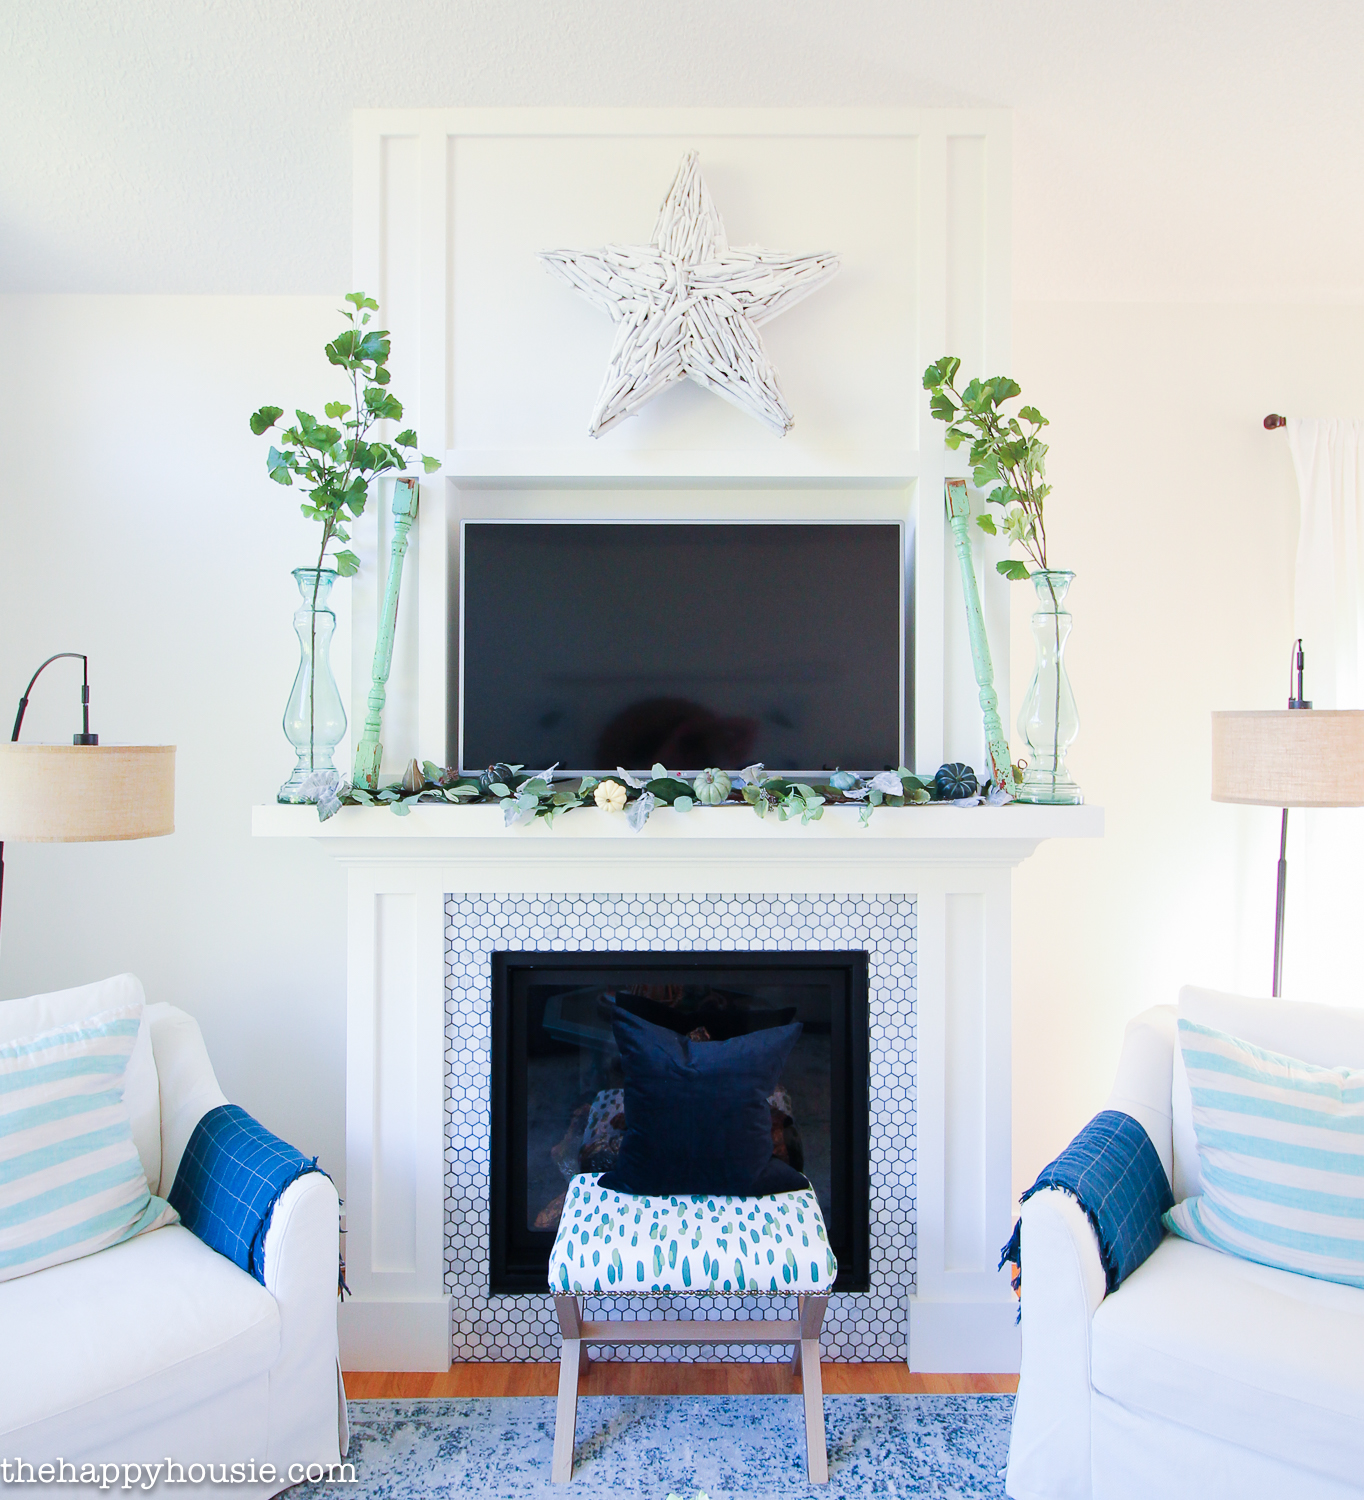 A fireplace with a TV on the mantel and a small stool in front of it with a blue pillow on the stool.